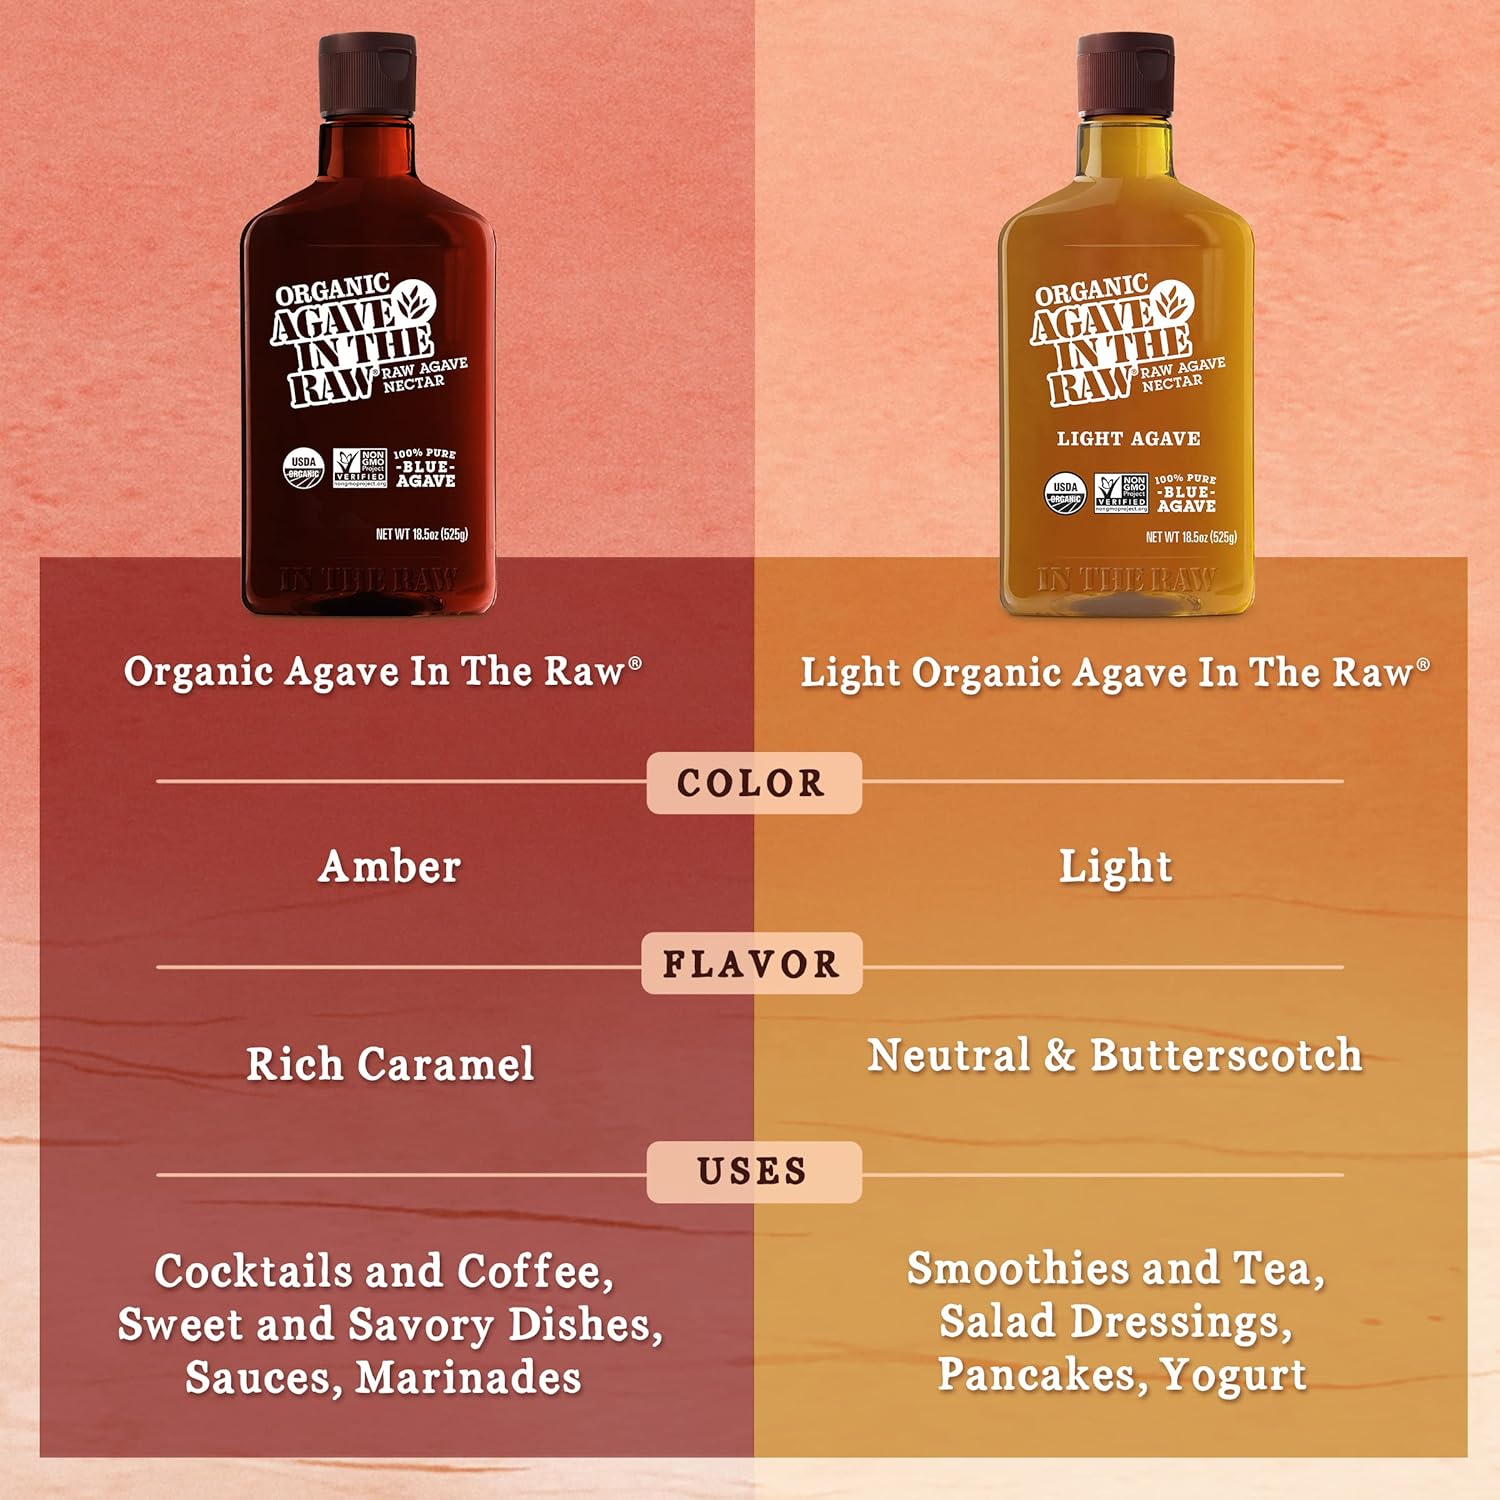 Agave In The Raw Organic Agave Nectar Sweetener, Blue Agave Syrup, No Erythritol, Sugar Substitute for Coffee, Baking, Hot & Cold Drinks, Natural, Low Carb, Vegan, Gluten-Free, 18.5oz Bottle (1 Pack)